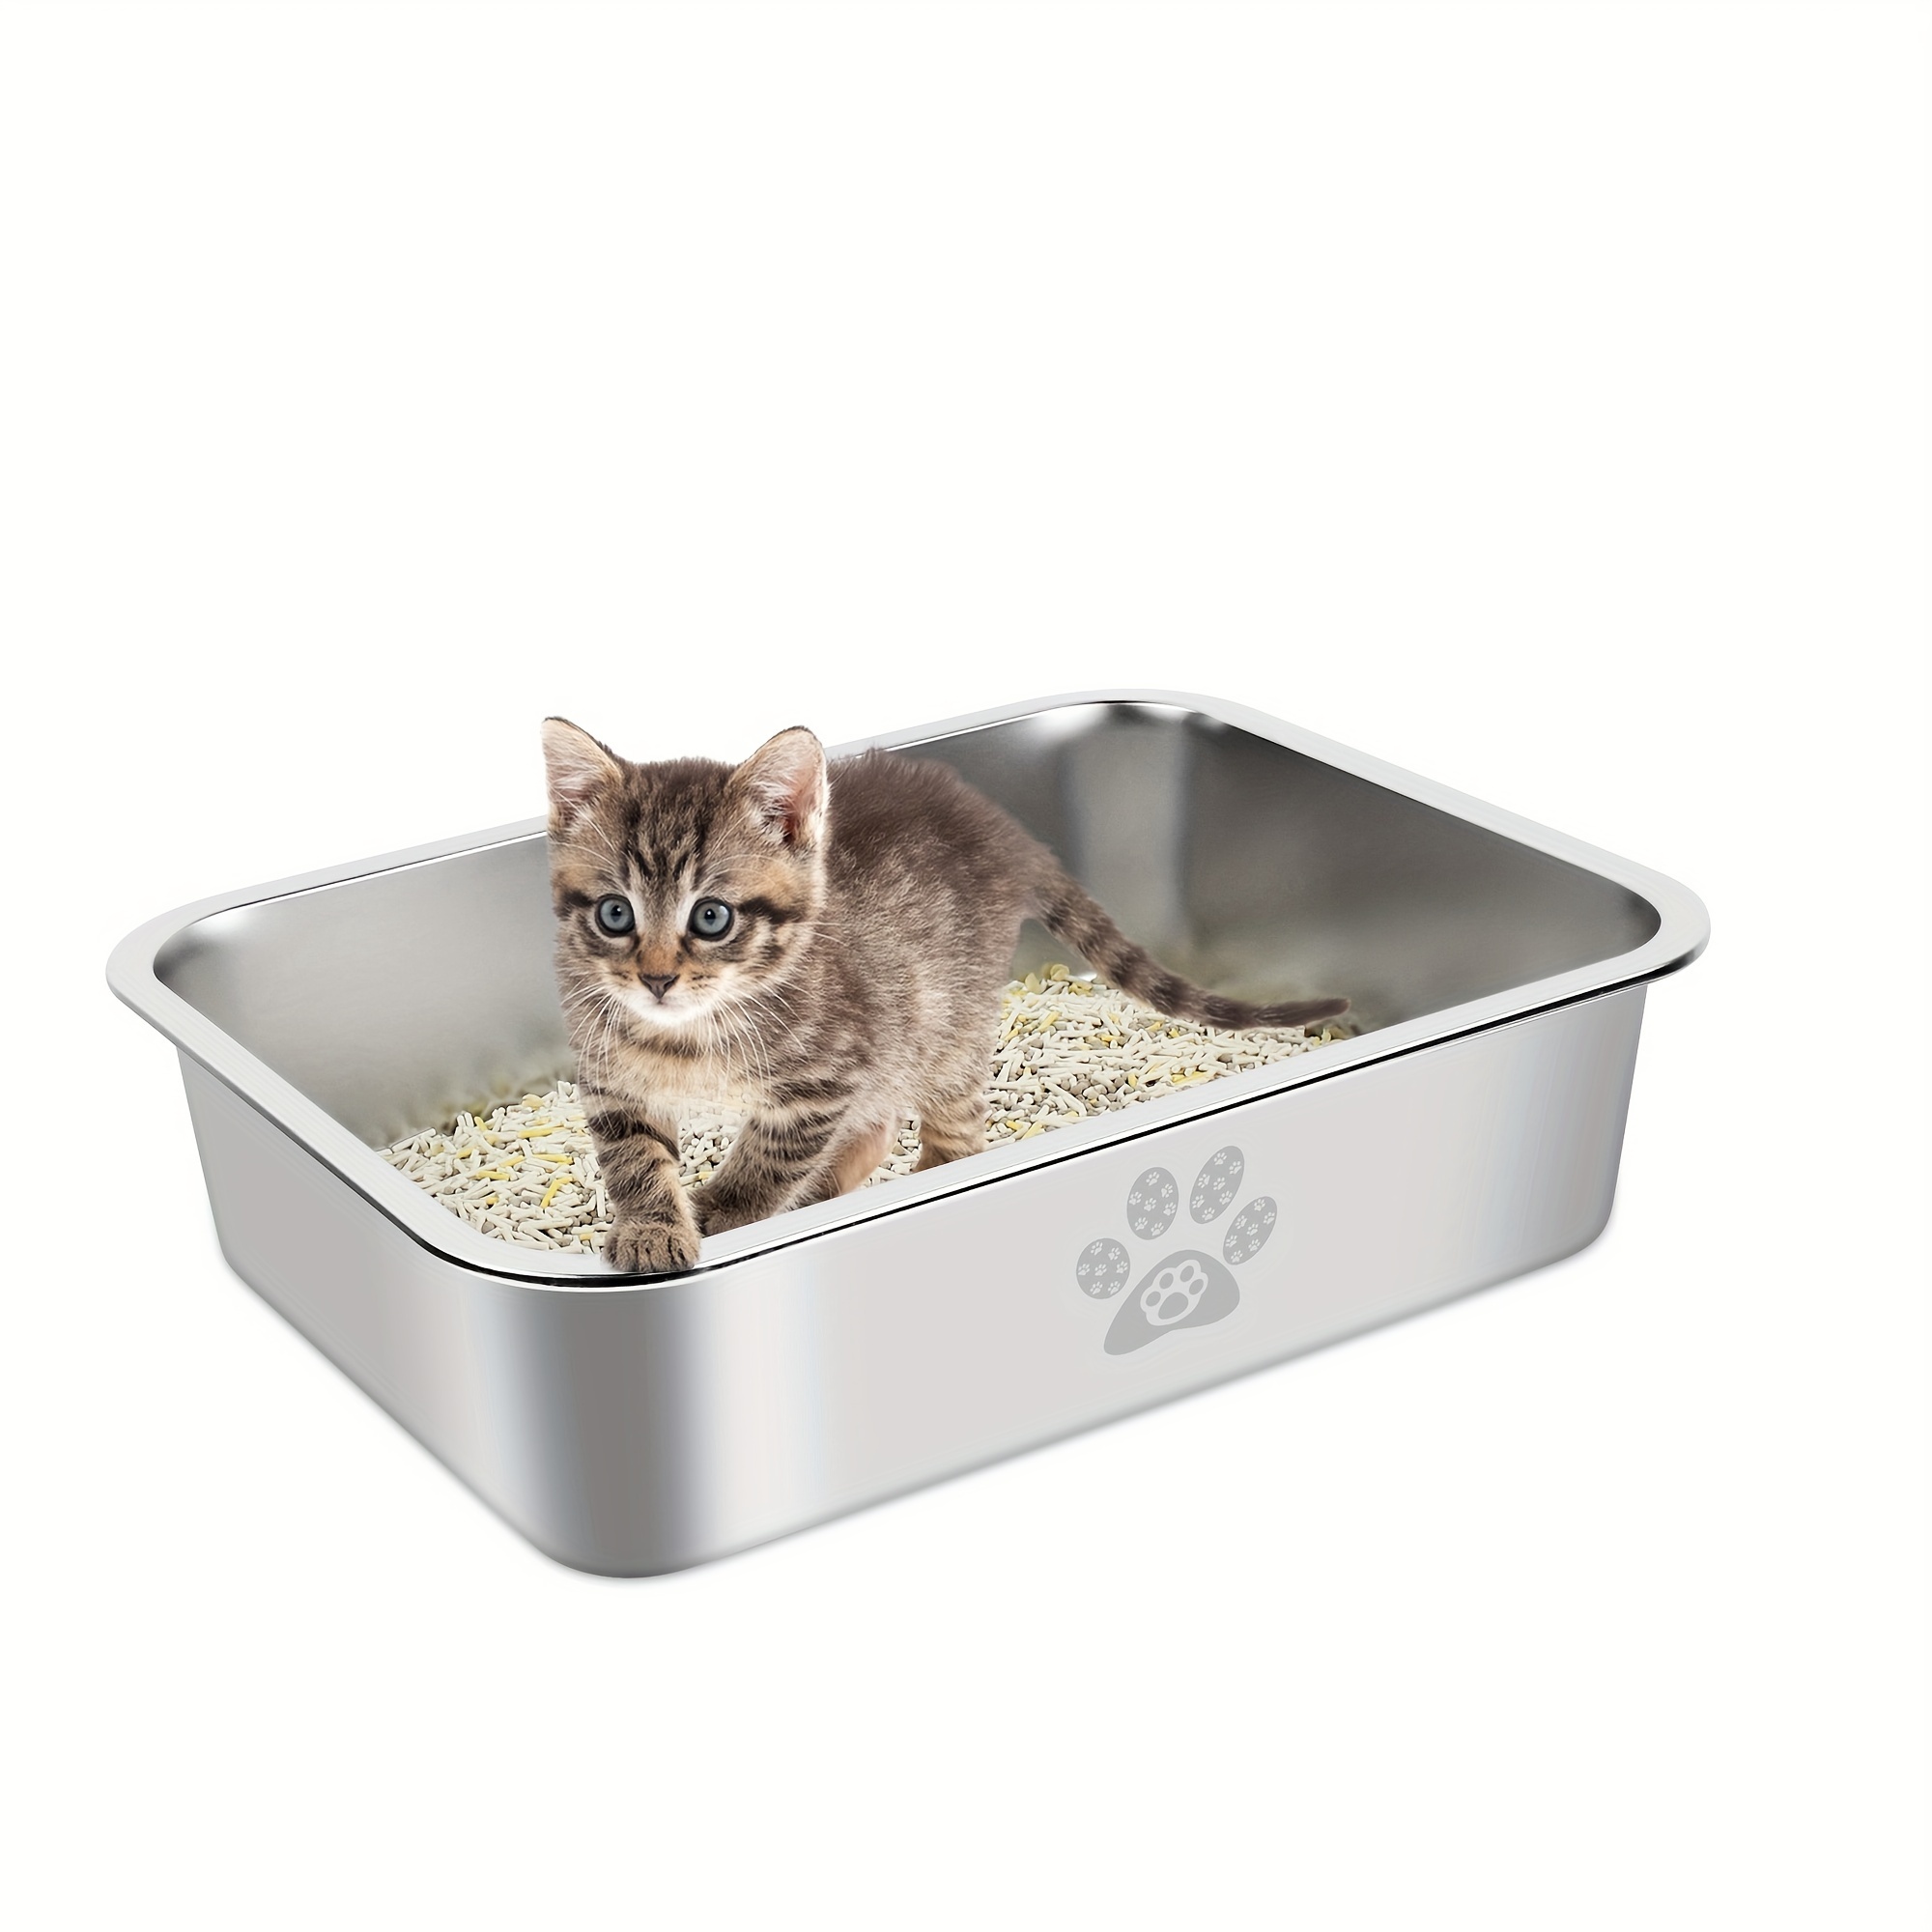 

Stainless Steel Cat Litter Box High Side Kitten Toilet Metal Cats Litter Pan, Splash-proof And Non-stick Cat Poop Box Odorless Pet Cleaning Tool Pet Products 15.7"x11.8"x3.9